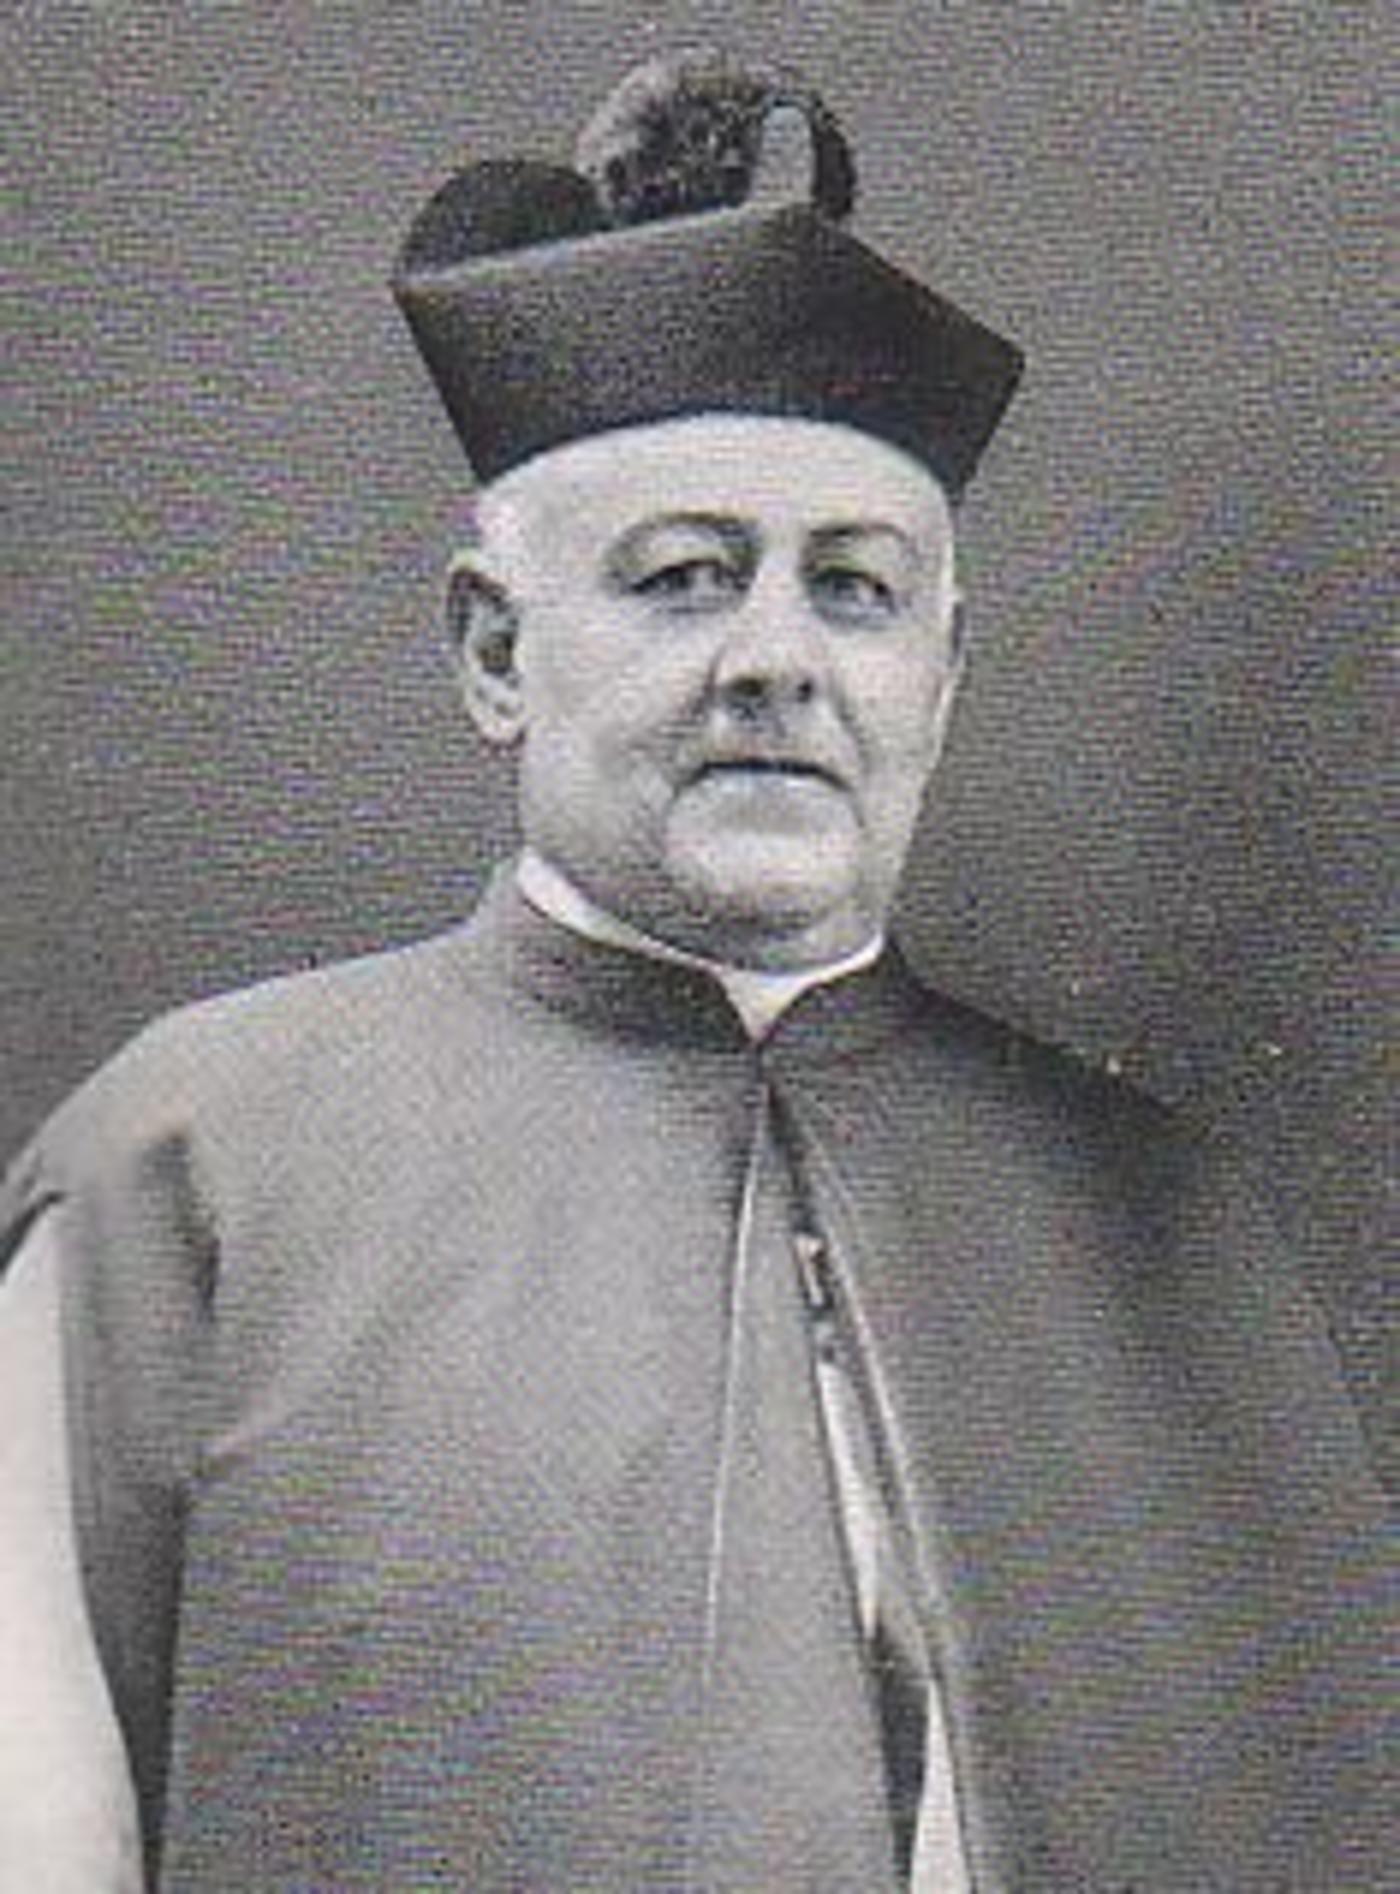 The Right Rev. Msgr. George A. Metzger